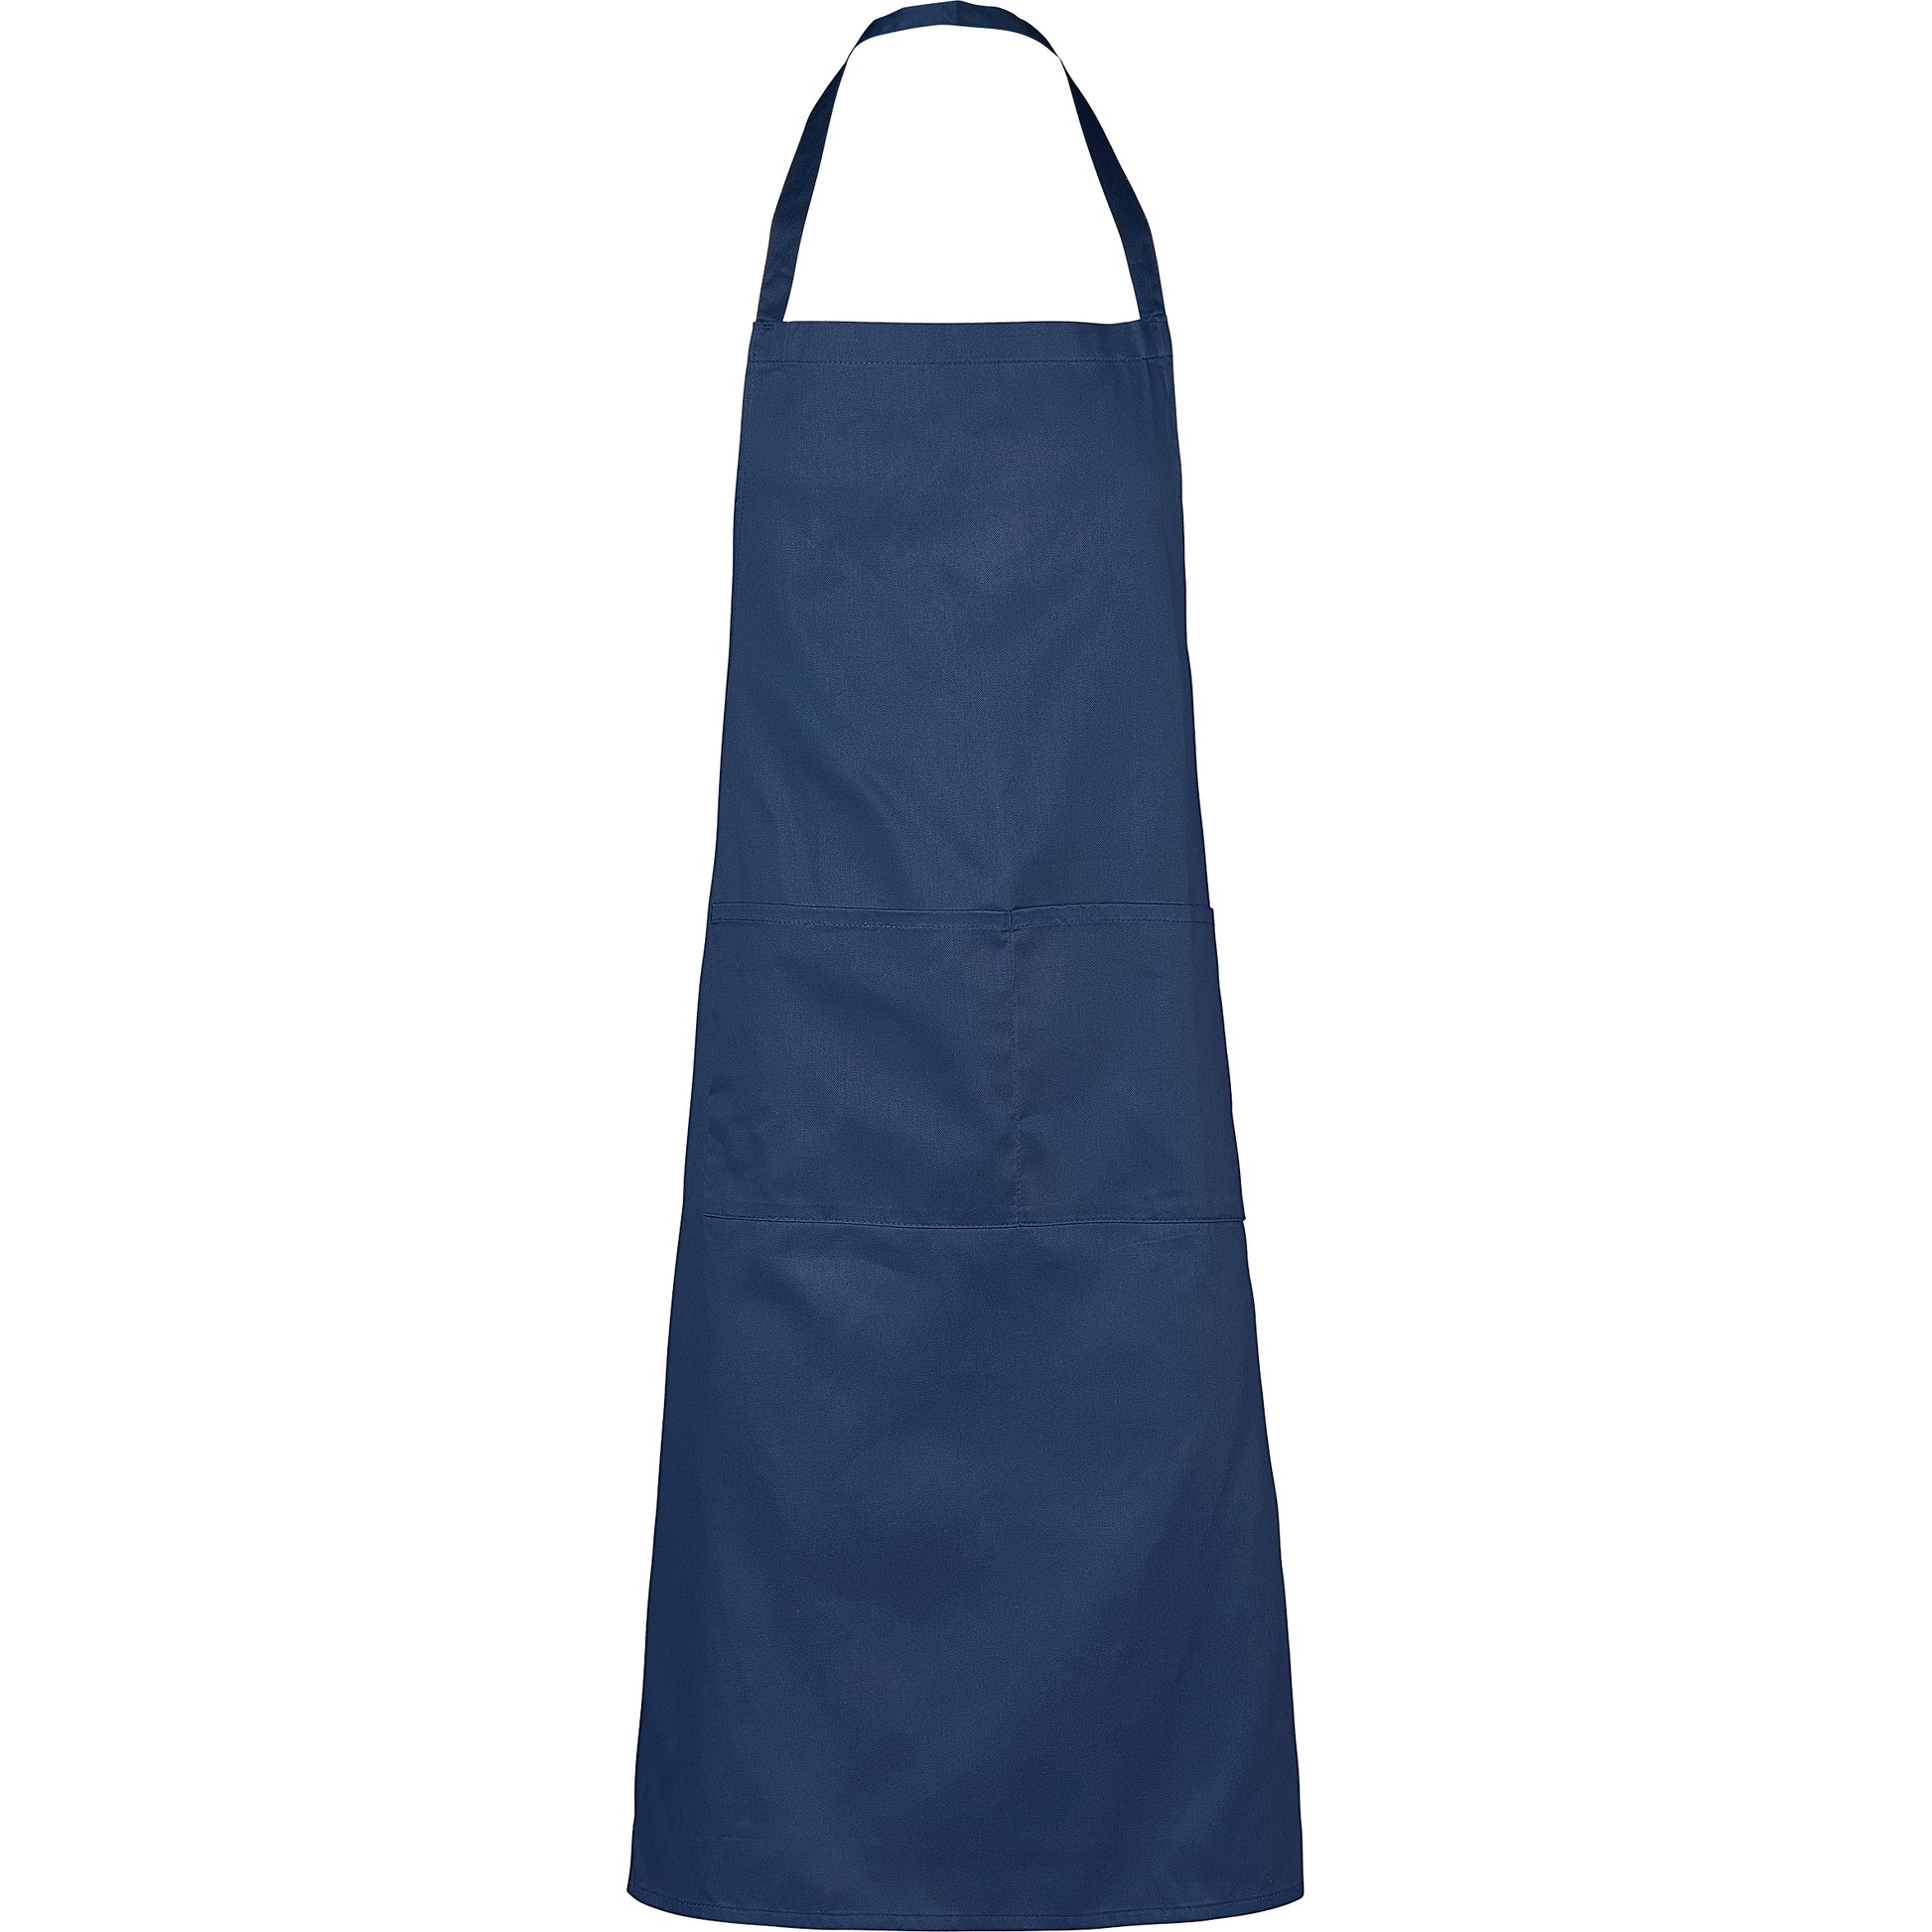 Personalised apron - navy. Your design